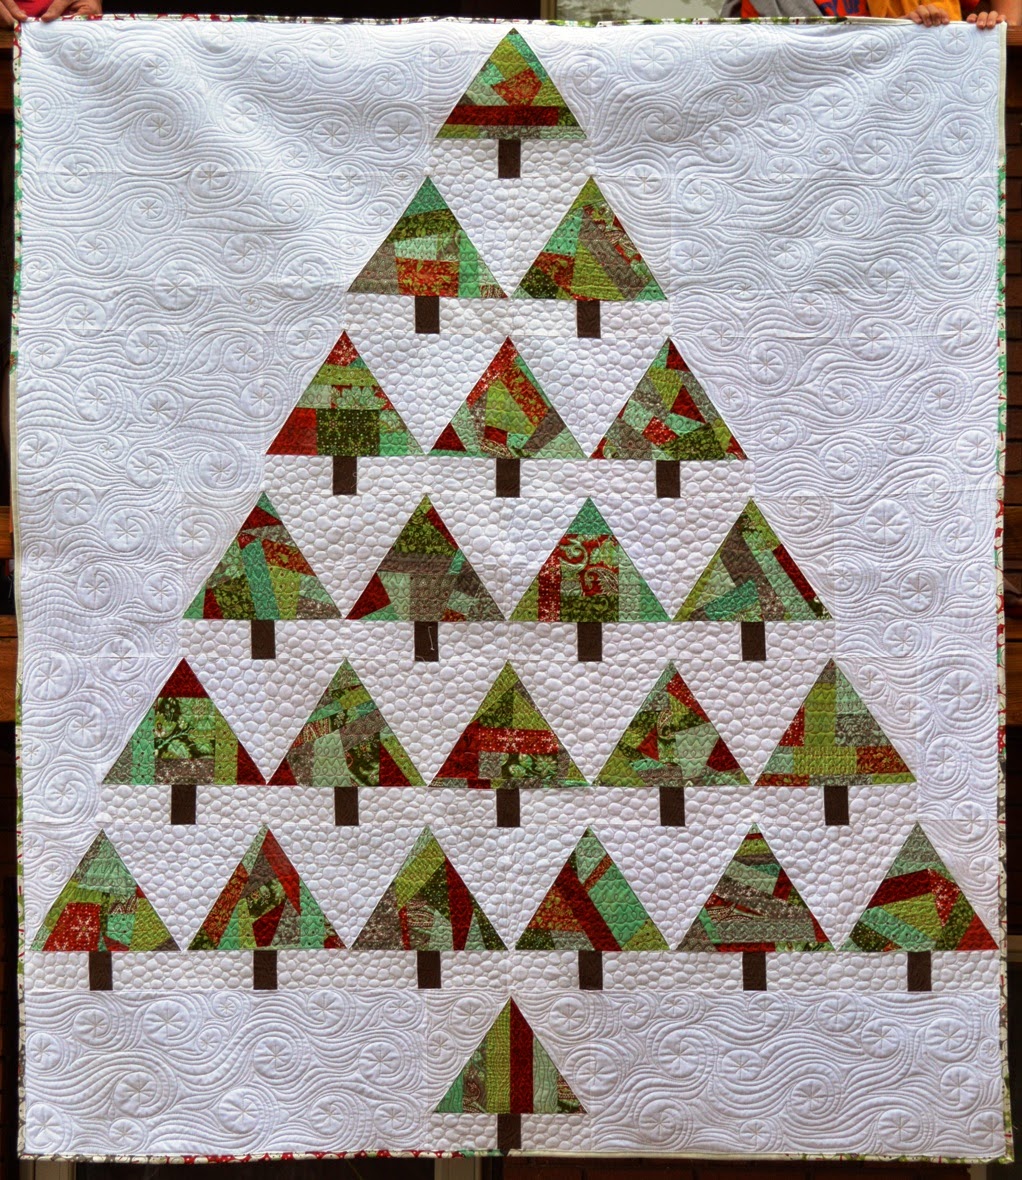 “O Christmas Trees” is a Free Modern Christmas Quilt Pattern designed by Melissa from Happy Quilting Melissa